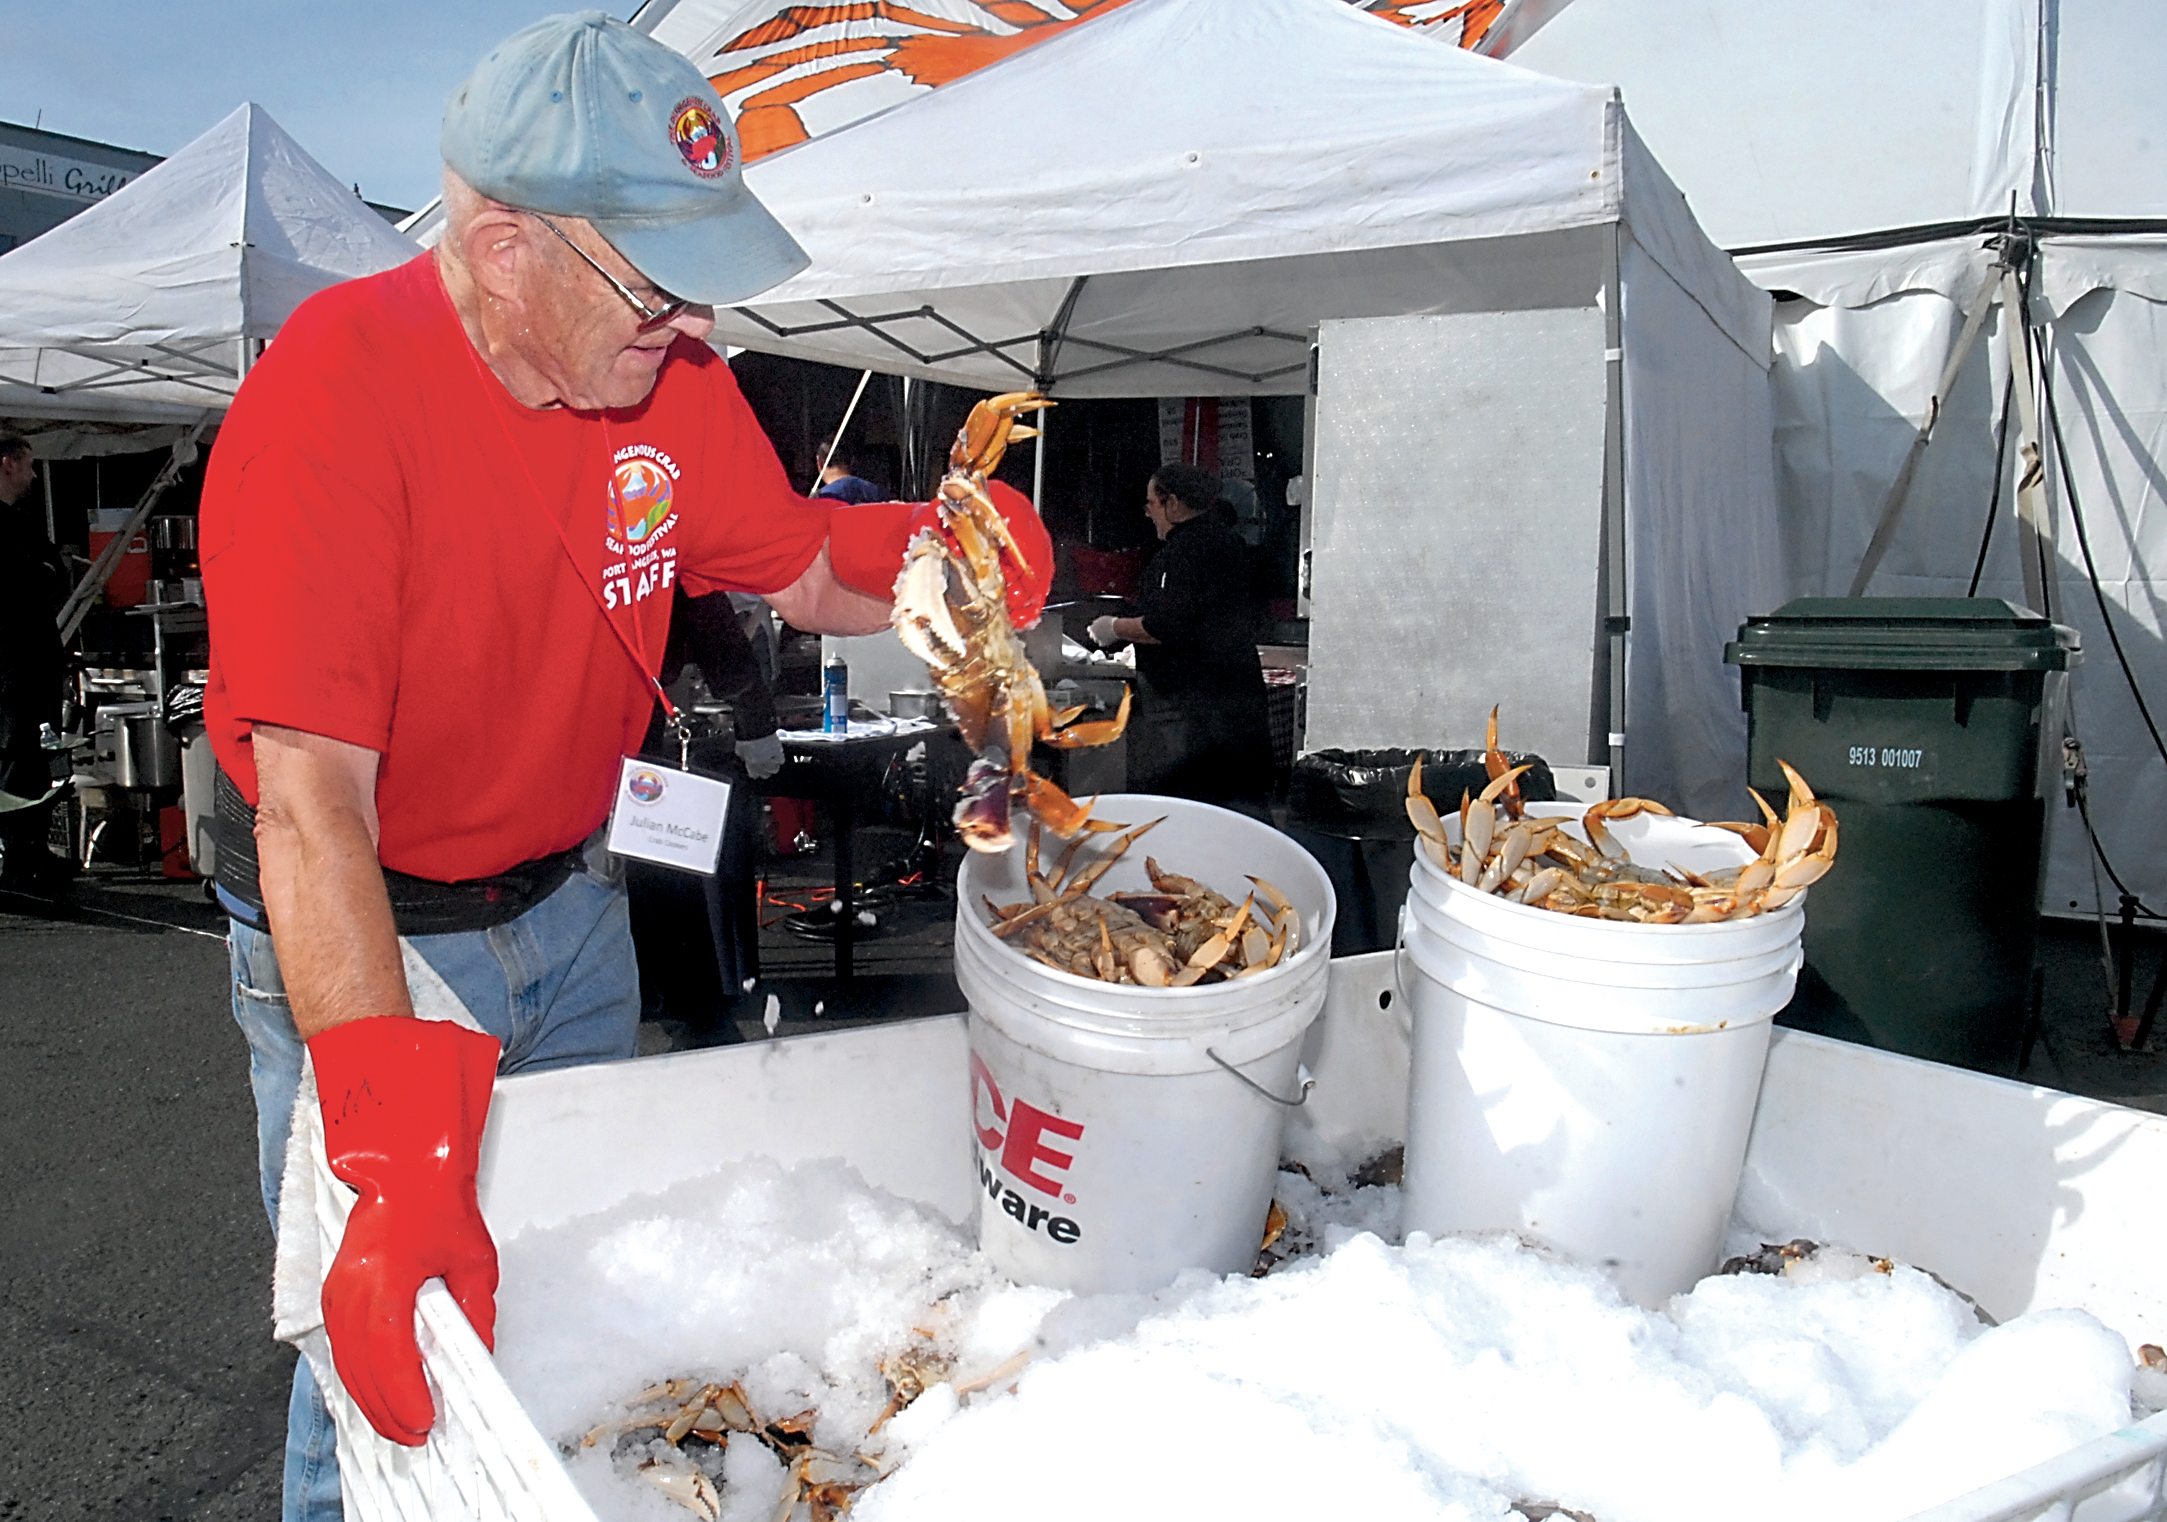 Rain no match for Dungeness Crab & Seafood Festival enthusiasts as